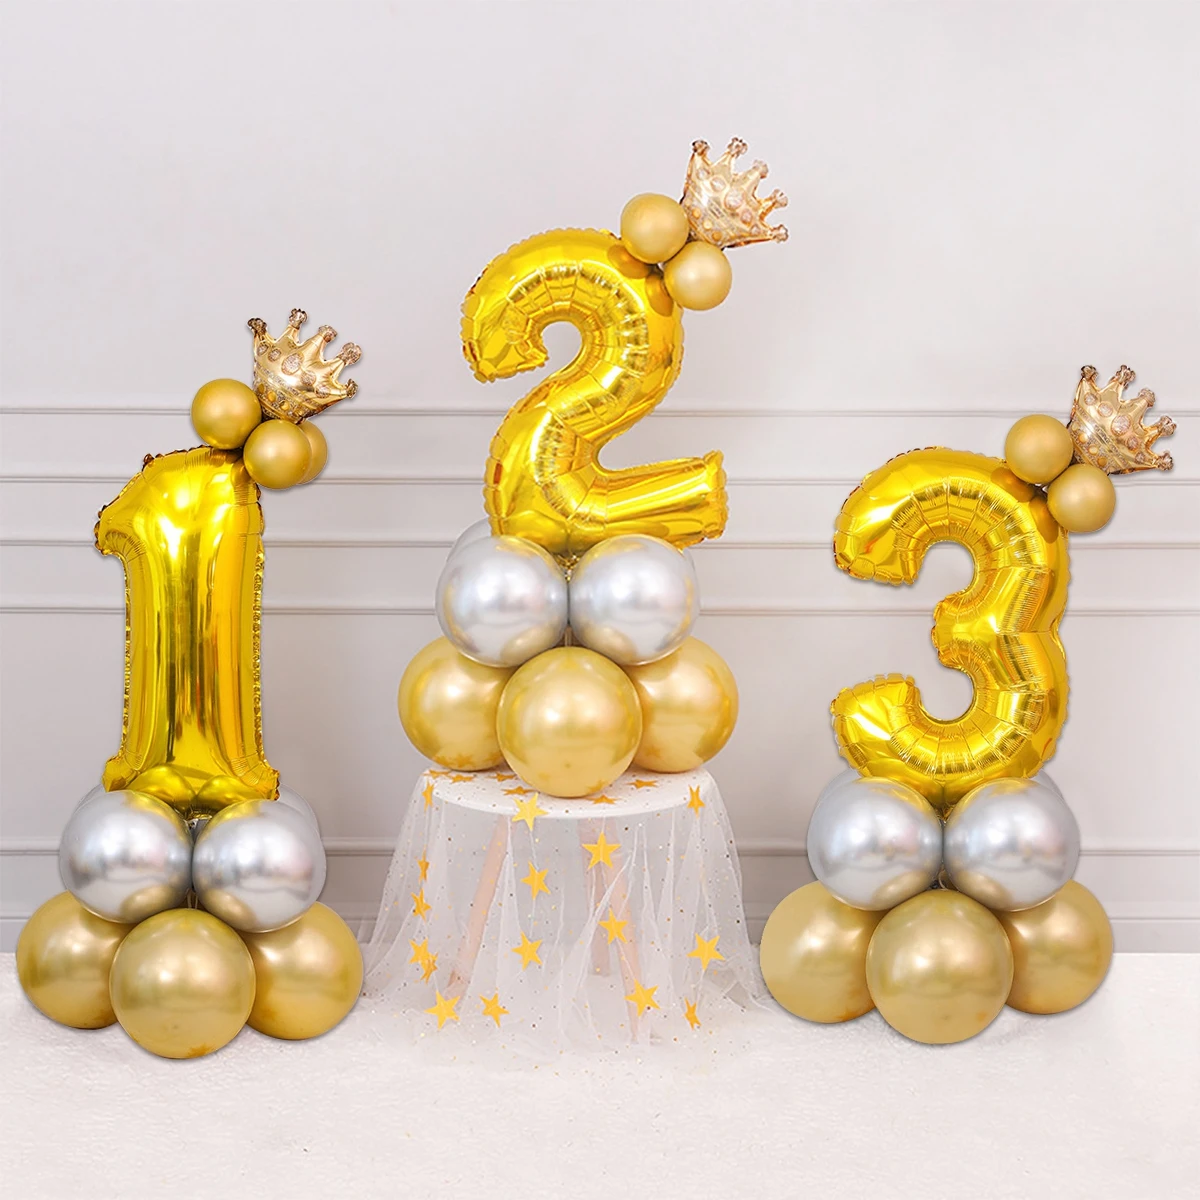 

32inch 1-3 Year Gold Number Foil Balloons Happy 1st Birthday Party Decorations Kids Baby Shower Helium Baloon Birthday Globos